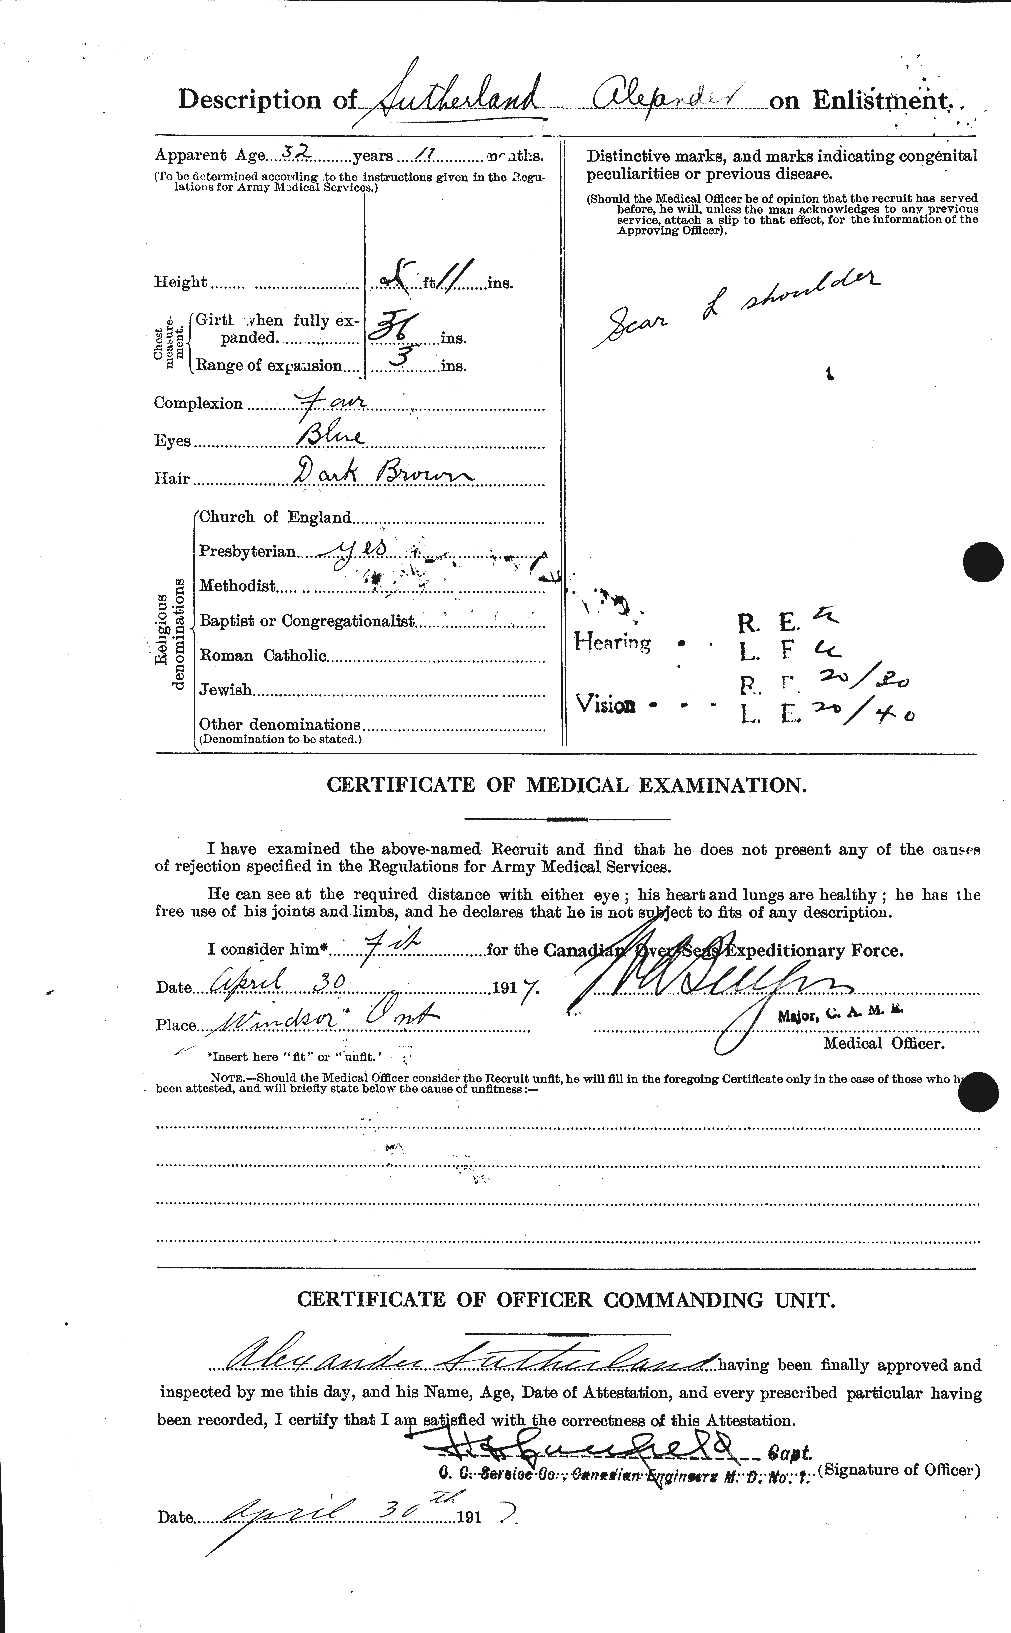 Personnel Records of the First World War - CEF 125369b